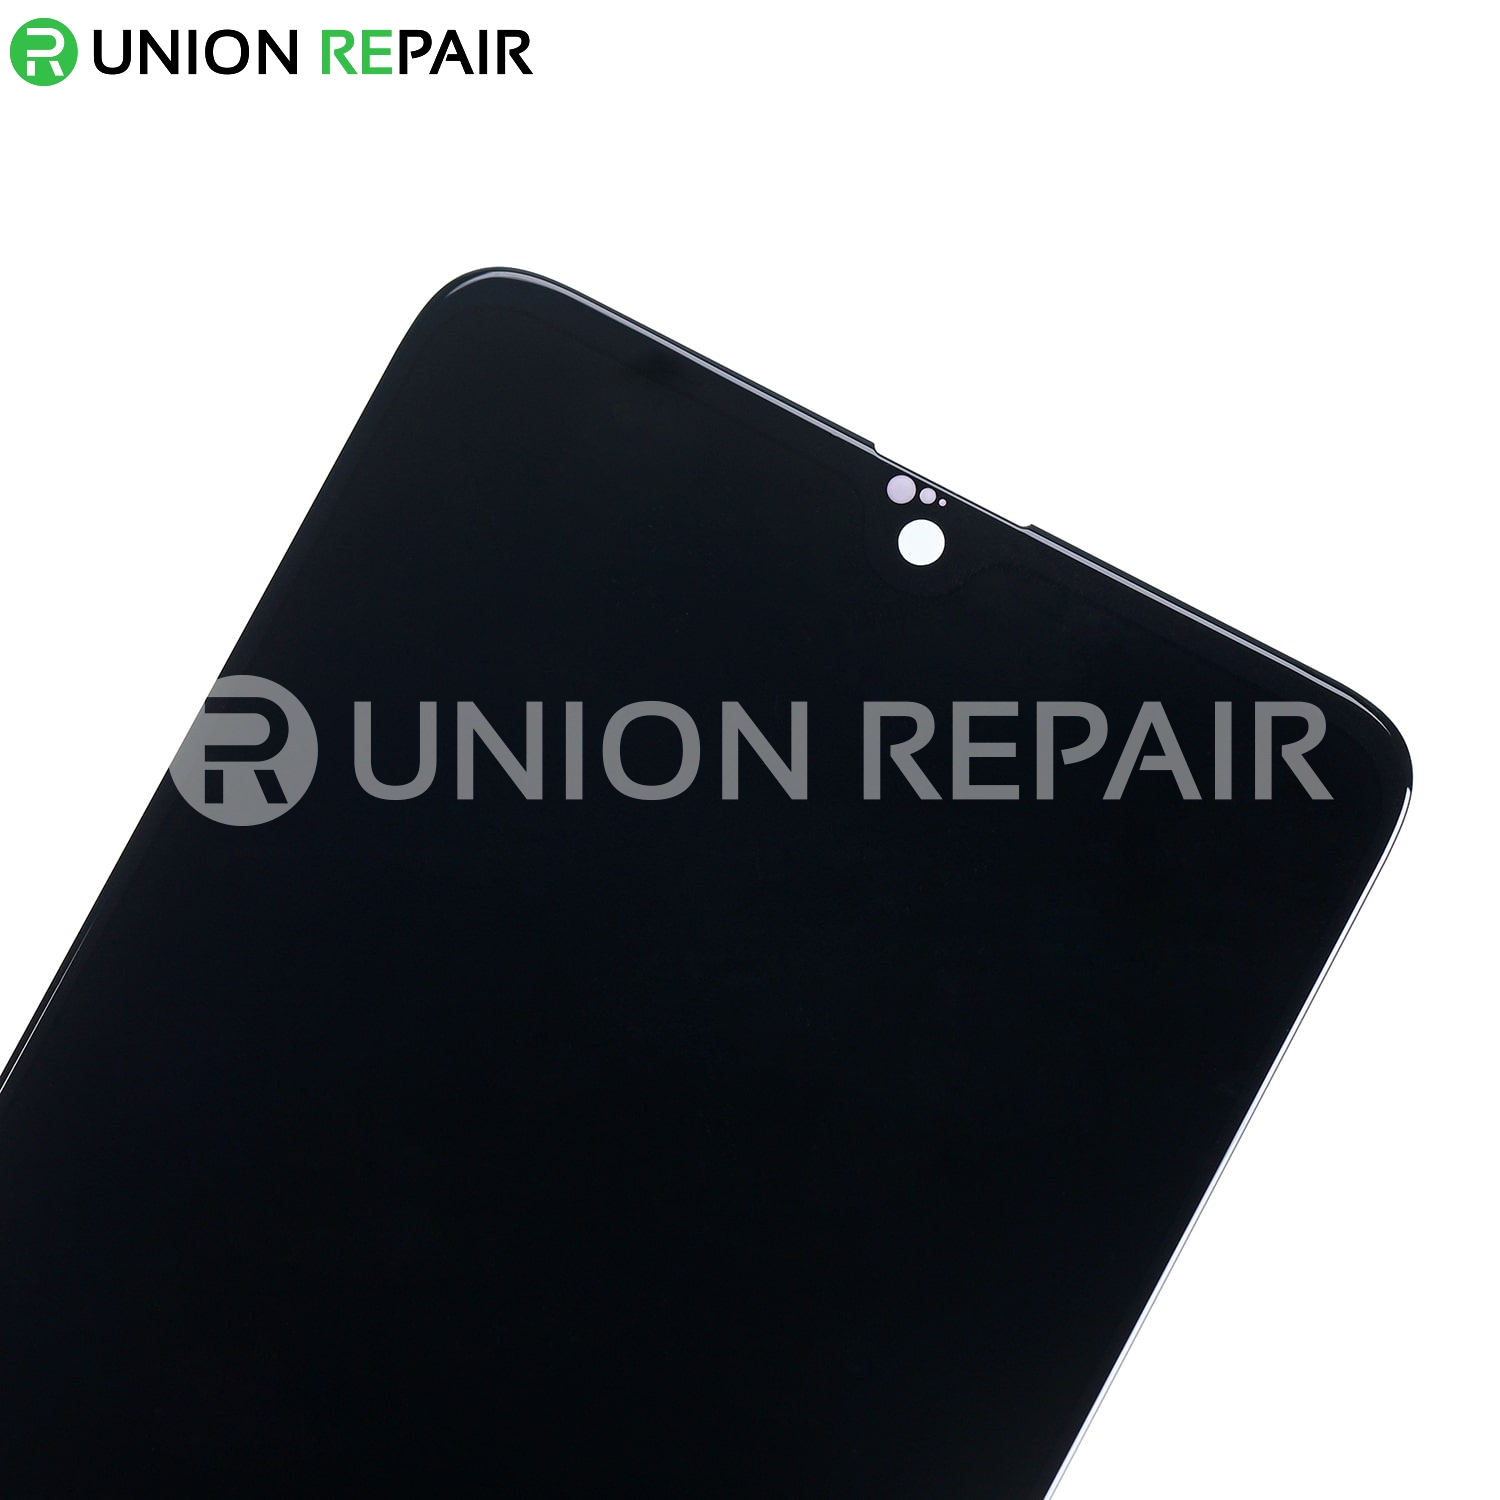 Replacement For Huawei Mate 20 LCD with Digitizer Assembly - Black